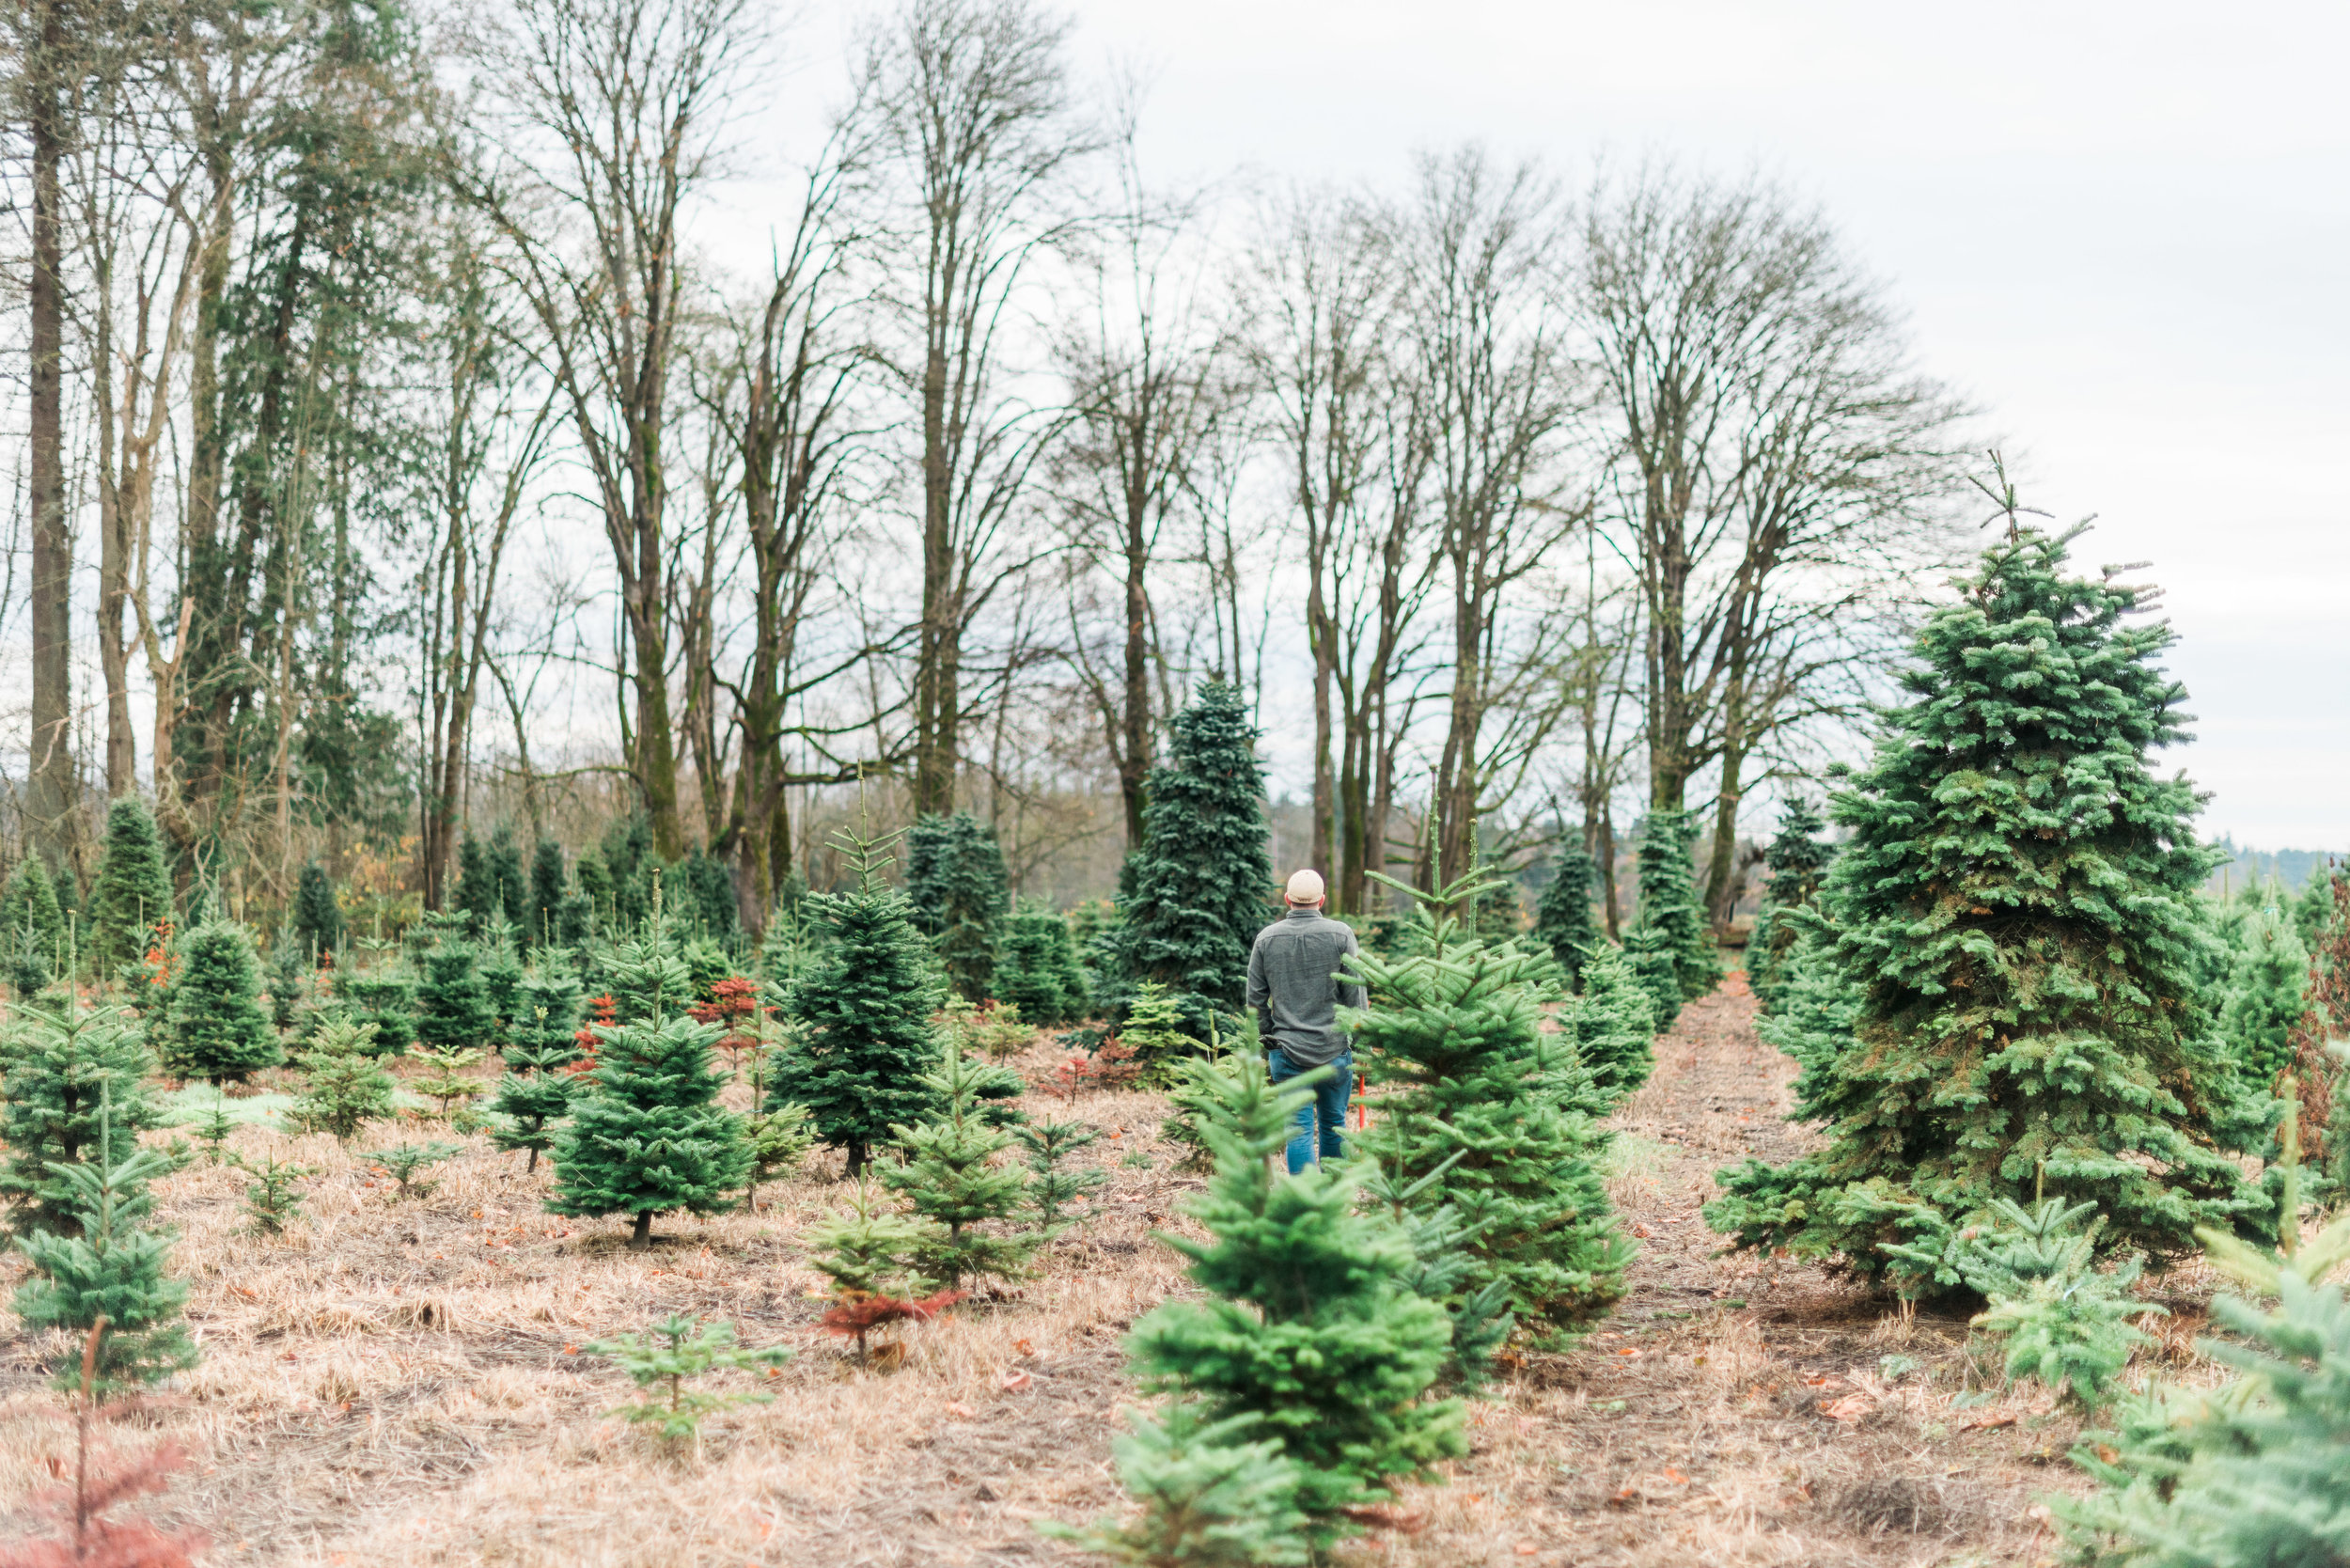 Brooke Summers Photography | The Great Christmas Tree Hunt